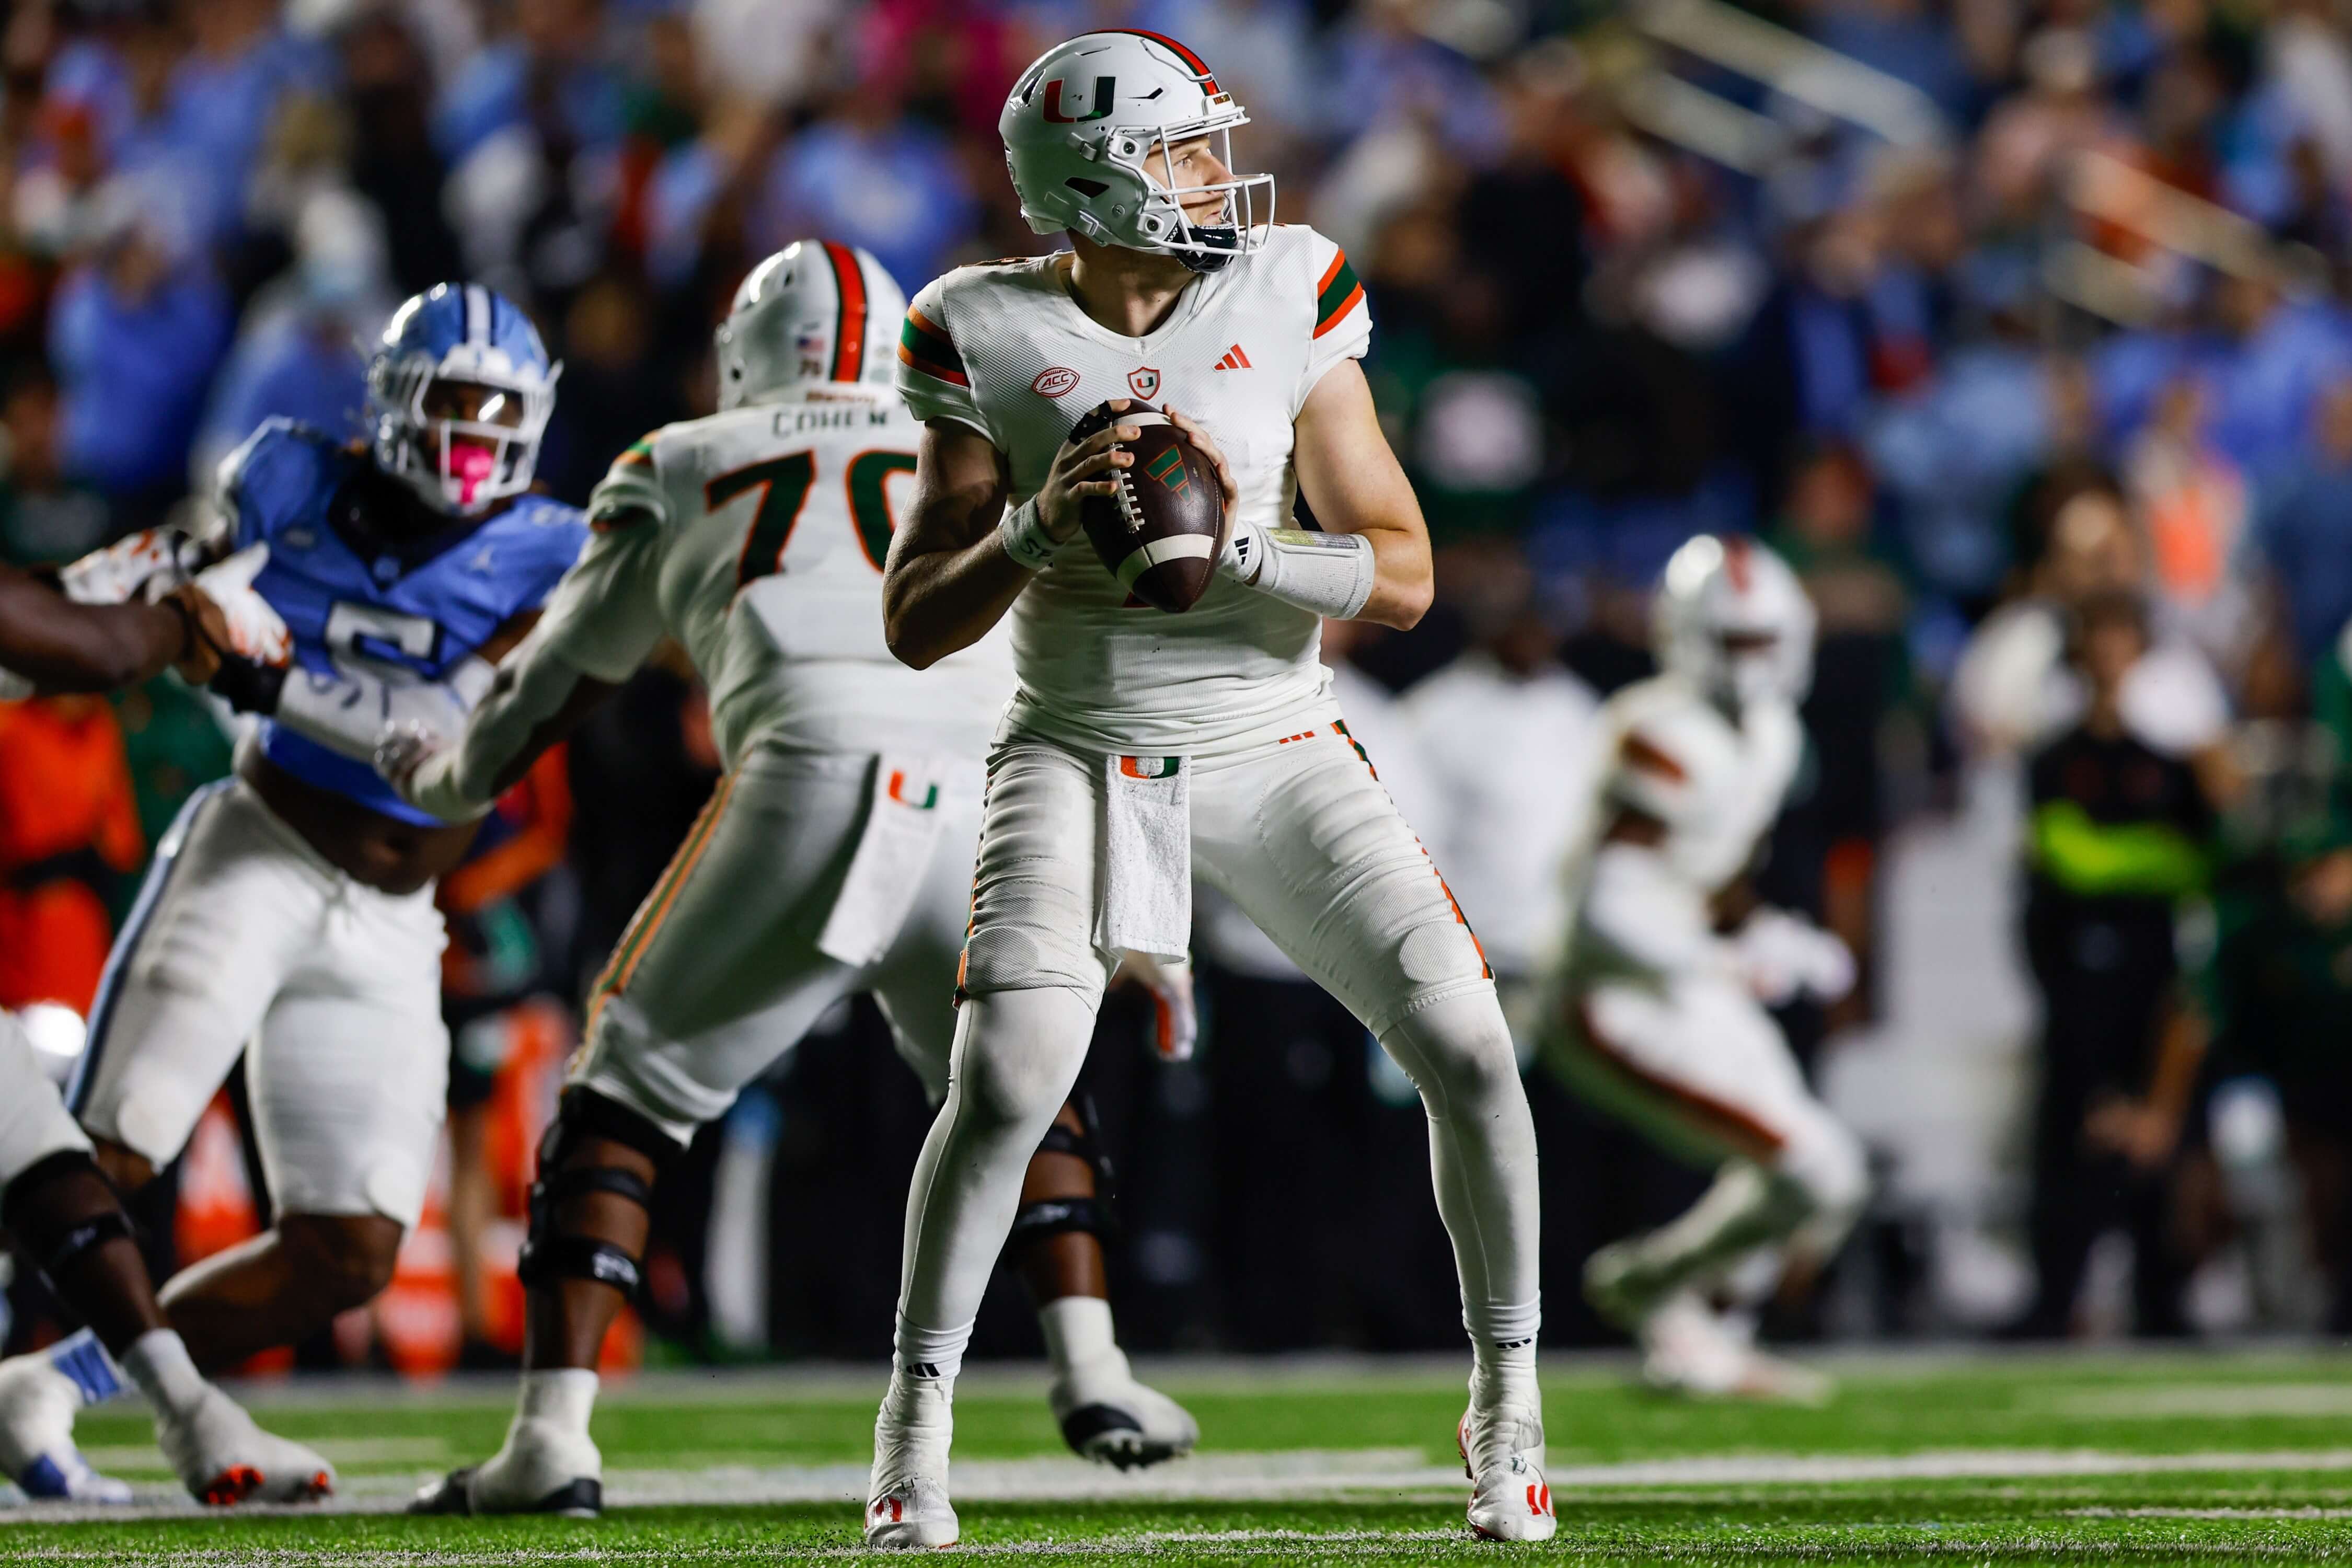 How to watch Miami (FL) Hurricanes vs. Clemson Tigers: college